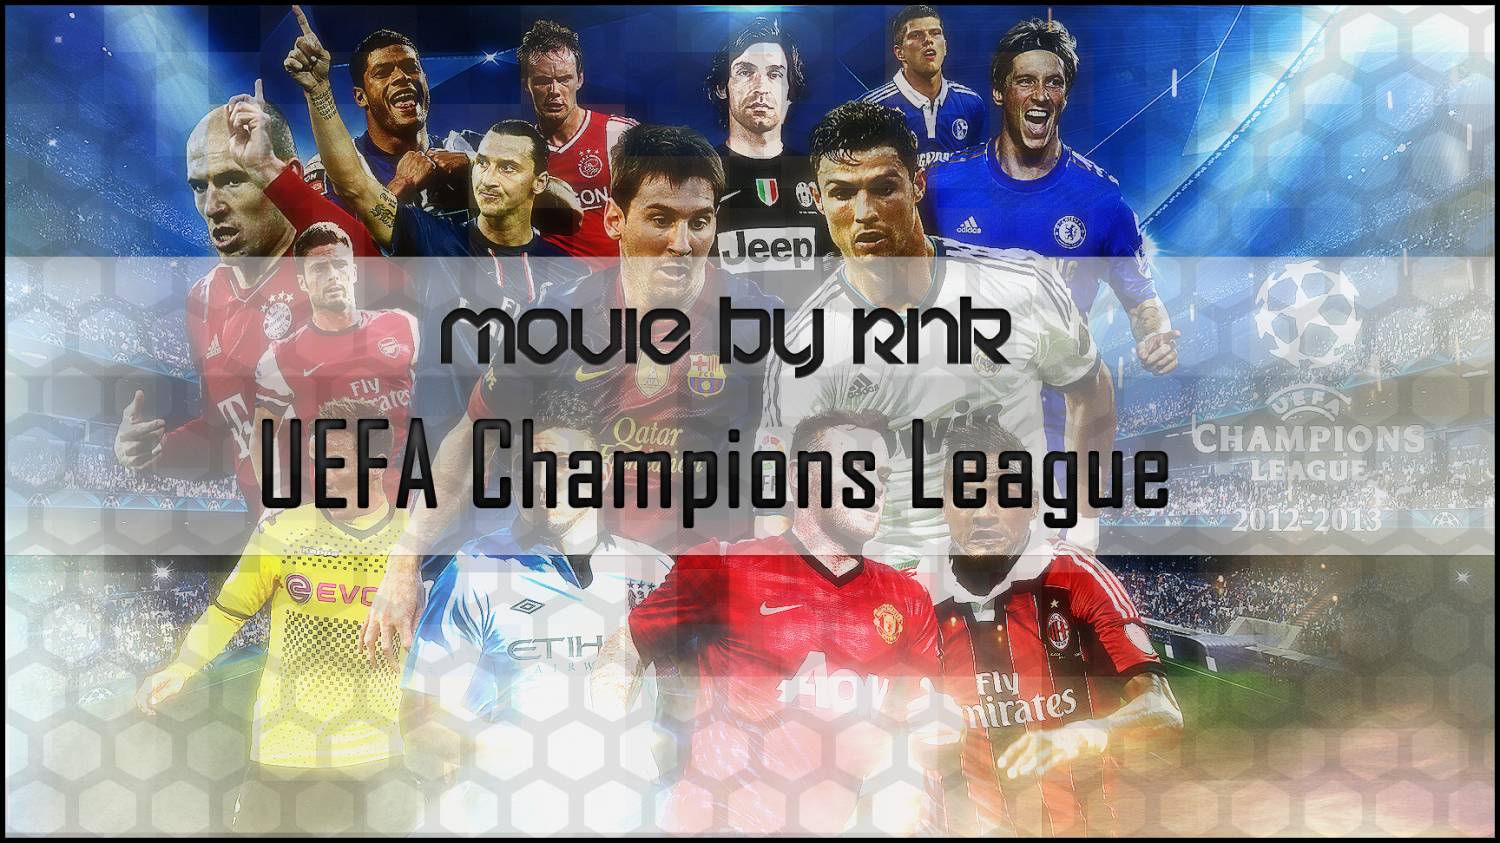 UEFA Champions League by RnK